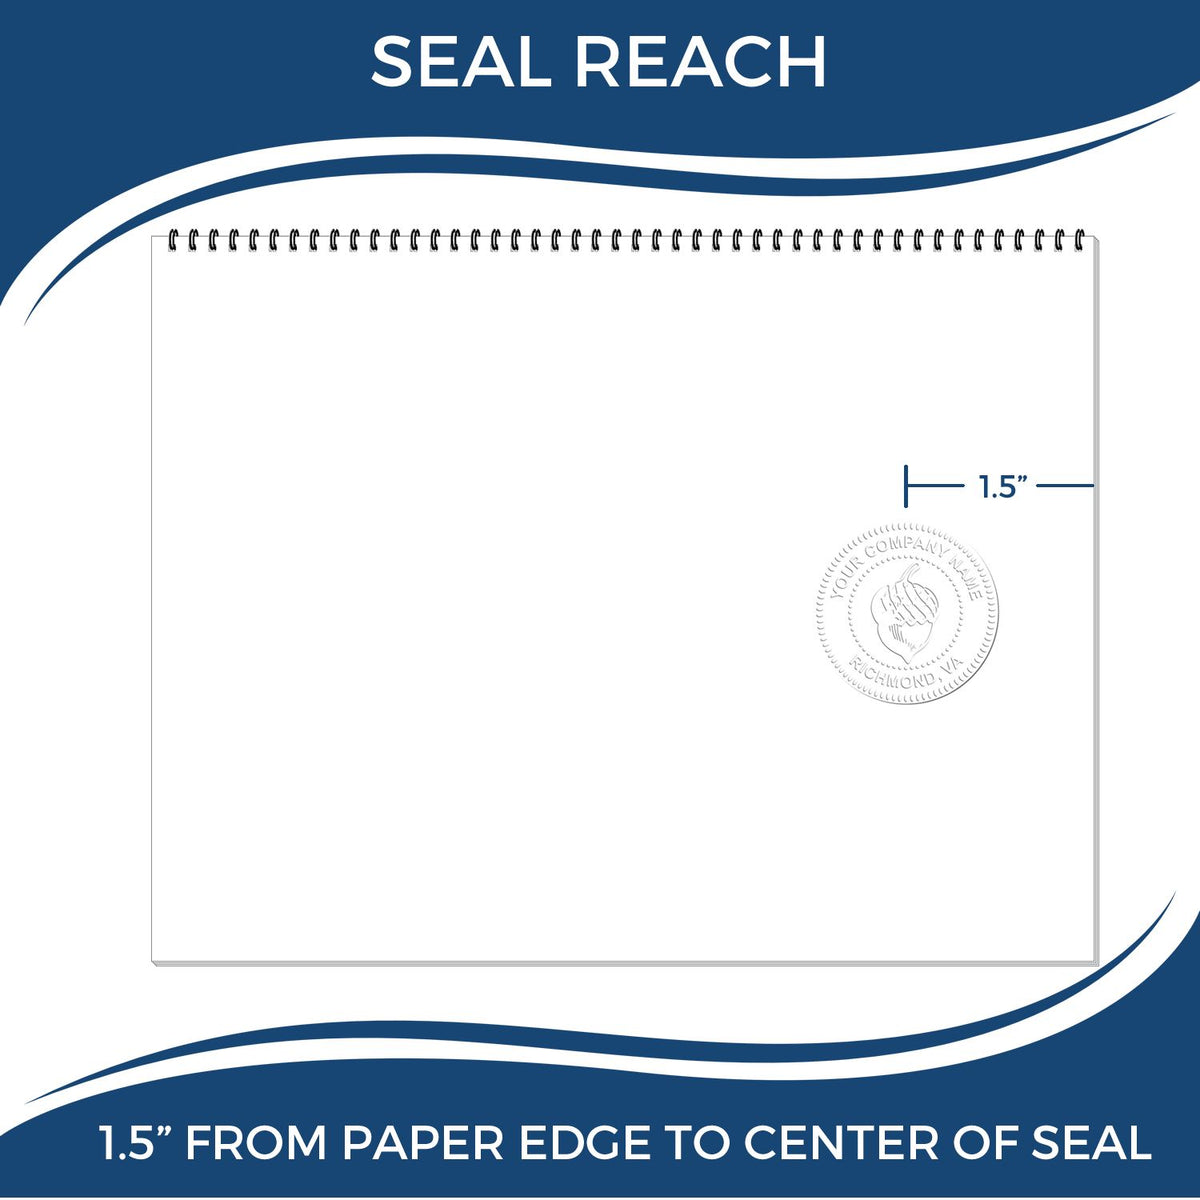 An infographic showing the seal reach which is represented by a ruler and a miniature seal image of the Soft Pocket West Virginia Landscape Architect Embosser